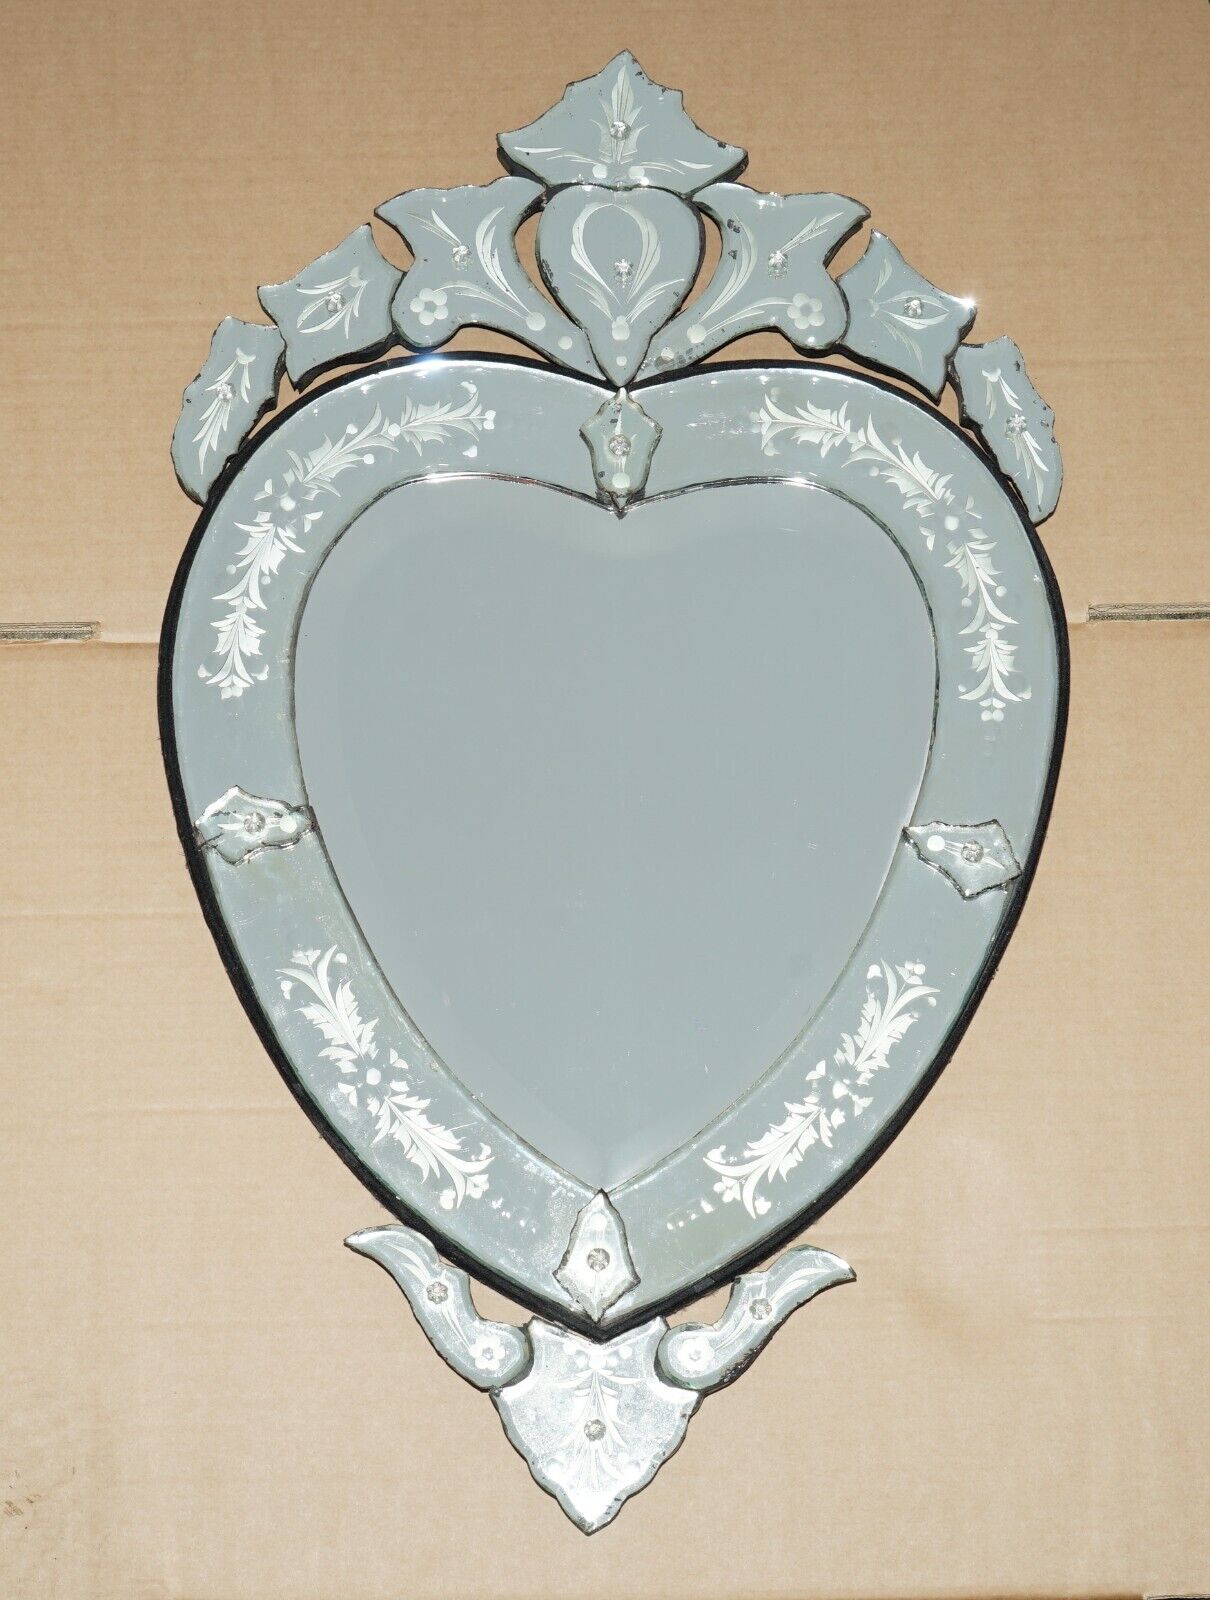 STUNNING ANTIQUE CIRCA 1910 VENETIAN ETCHED GLASS HEART SHAPED WALL MIRROR